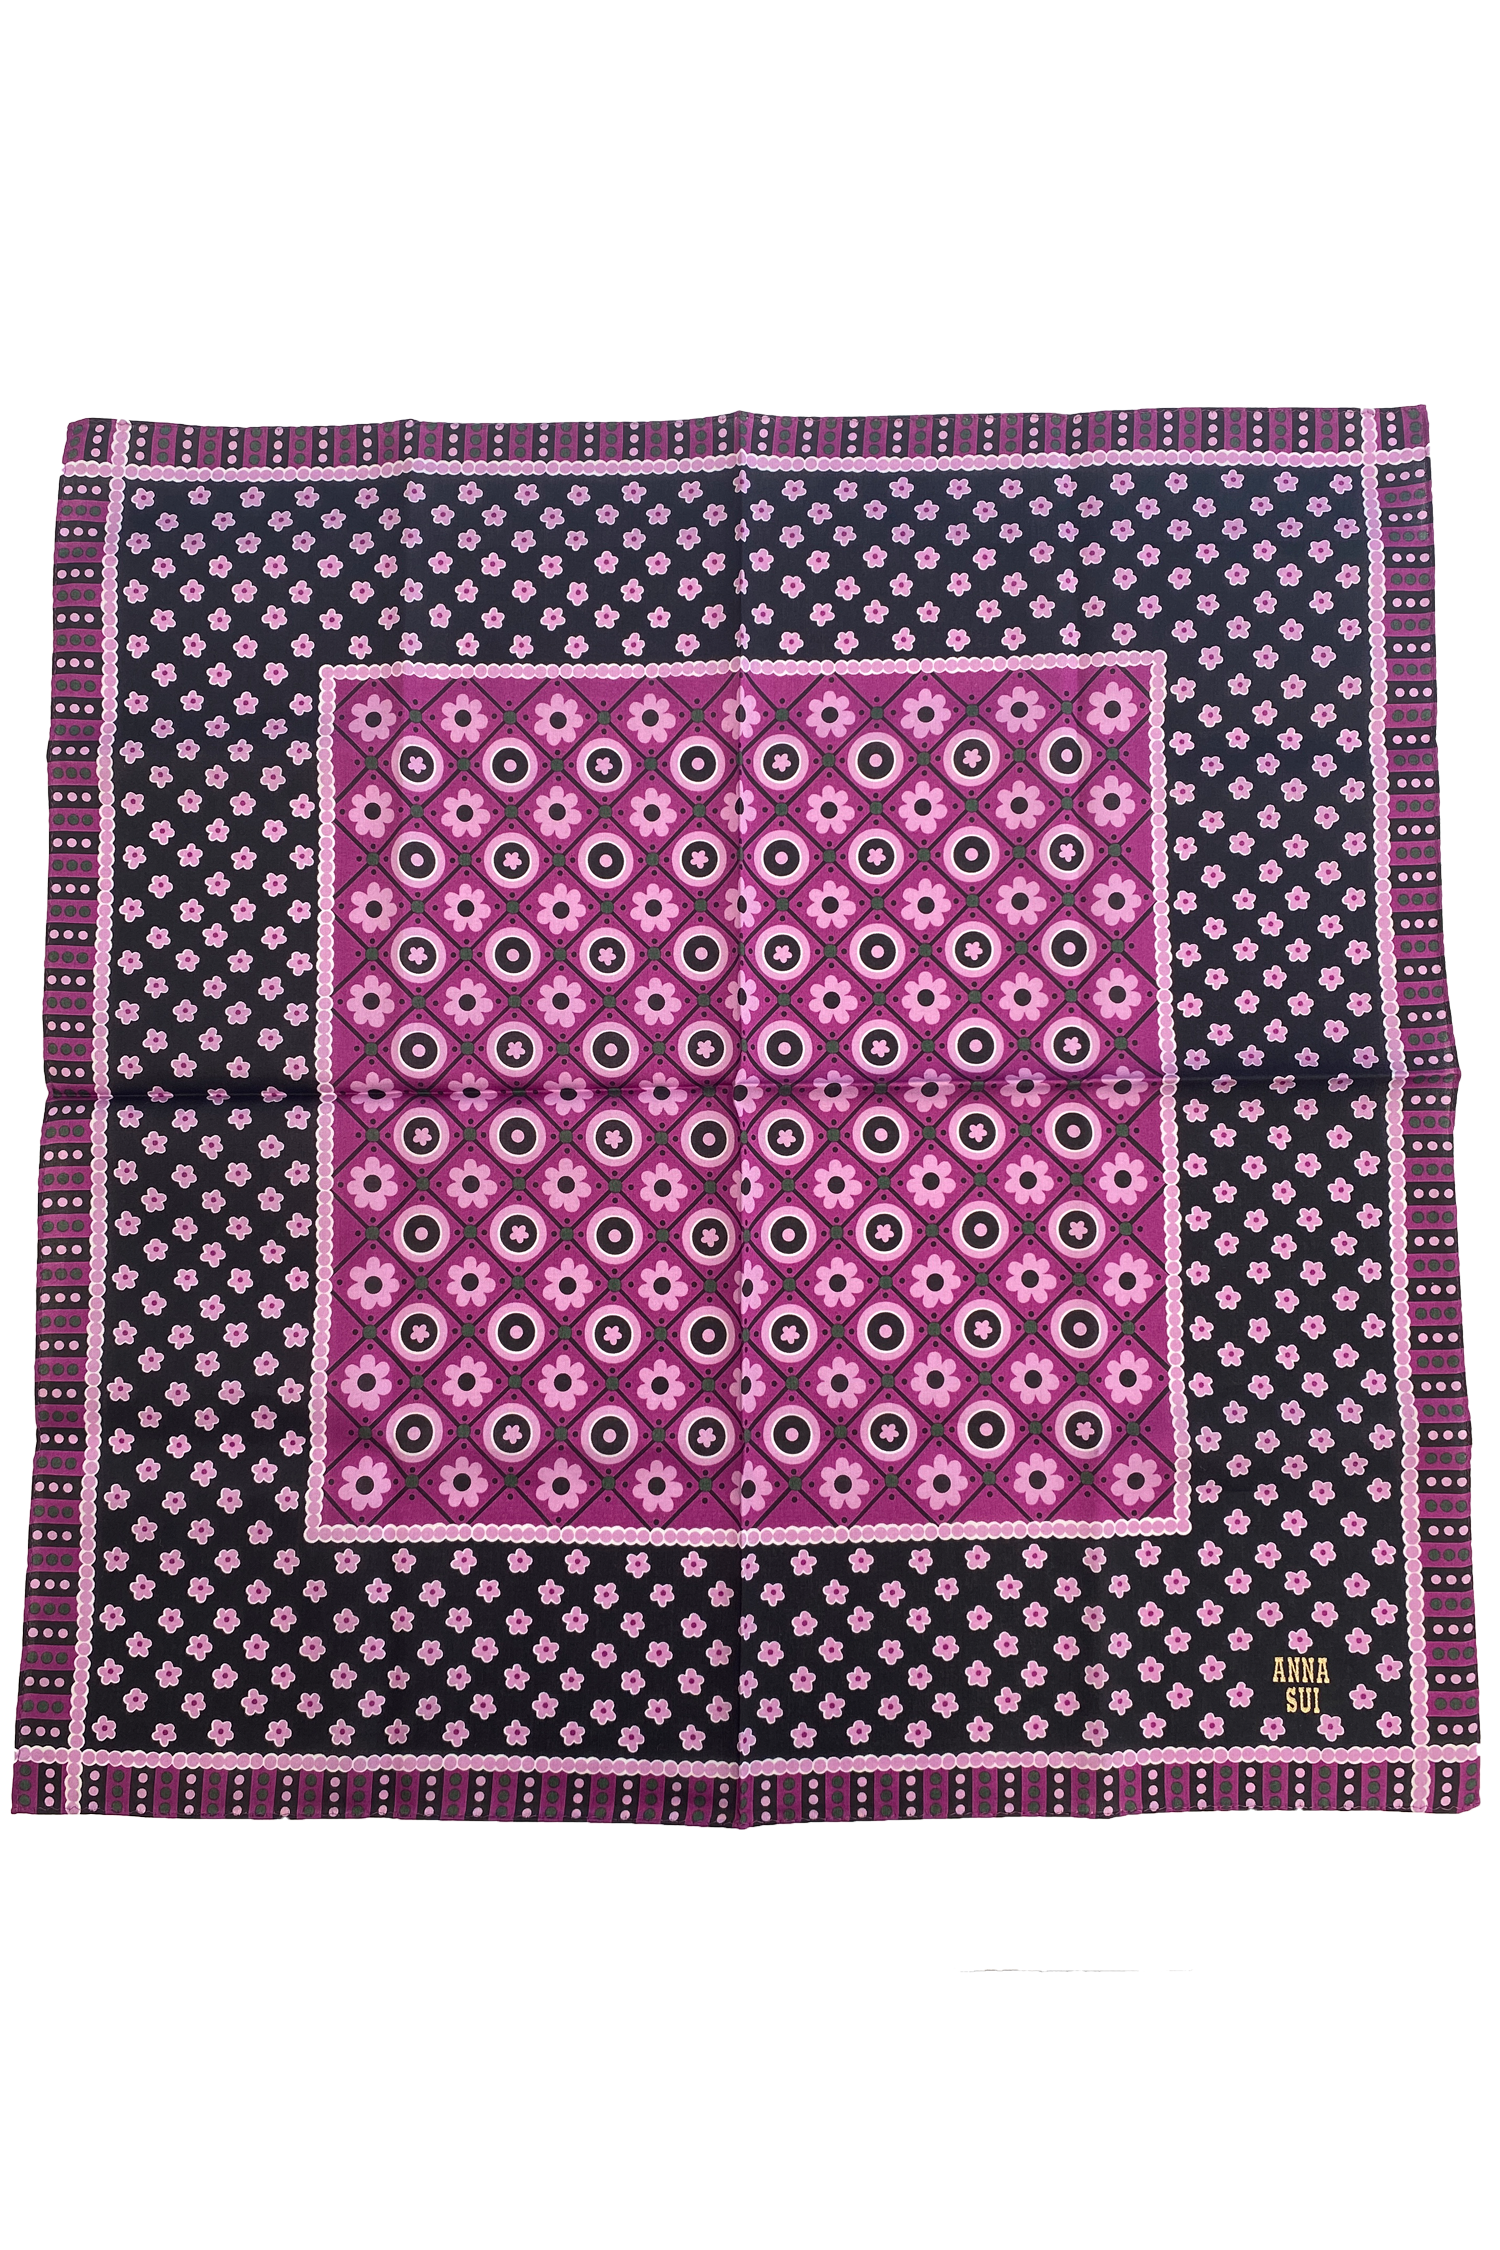 Handkerchief, center pink square pink flower then black with pink flowers, Anna’s label, pink border